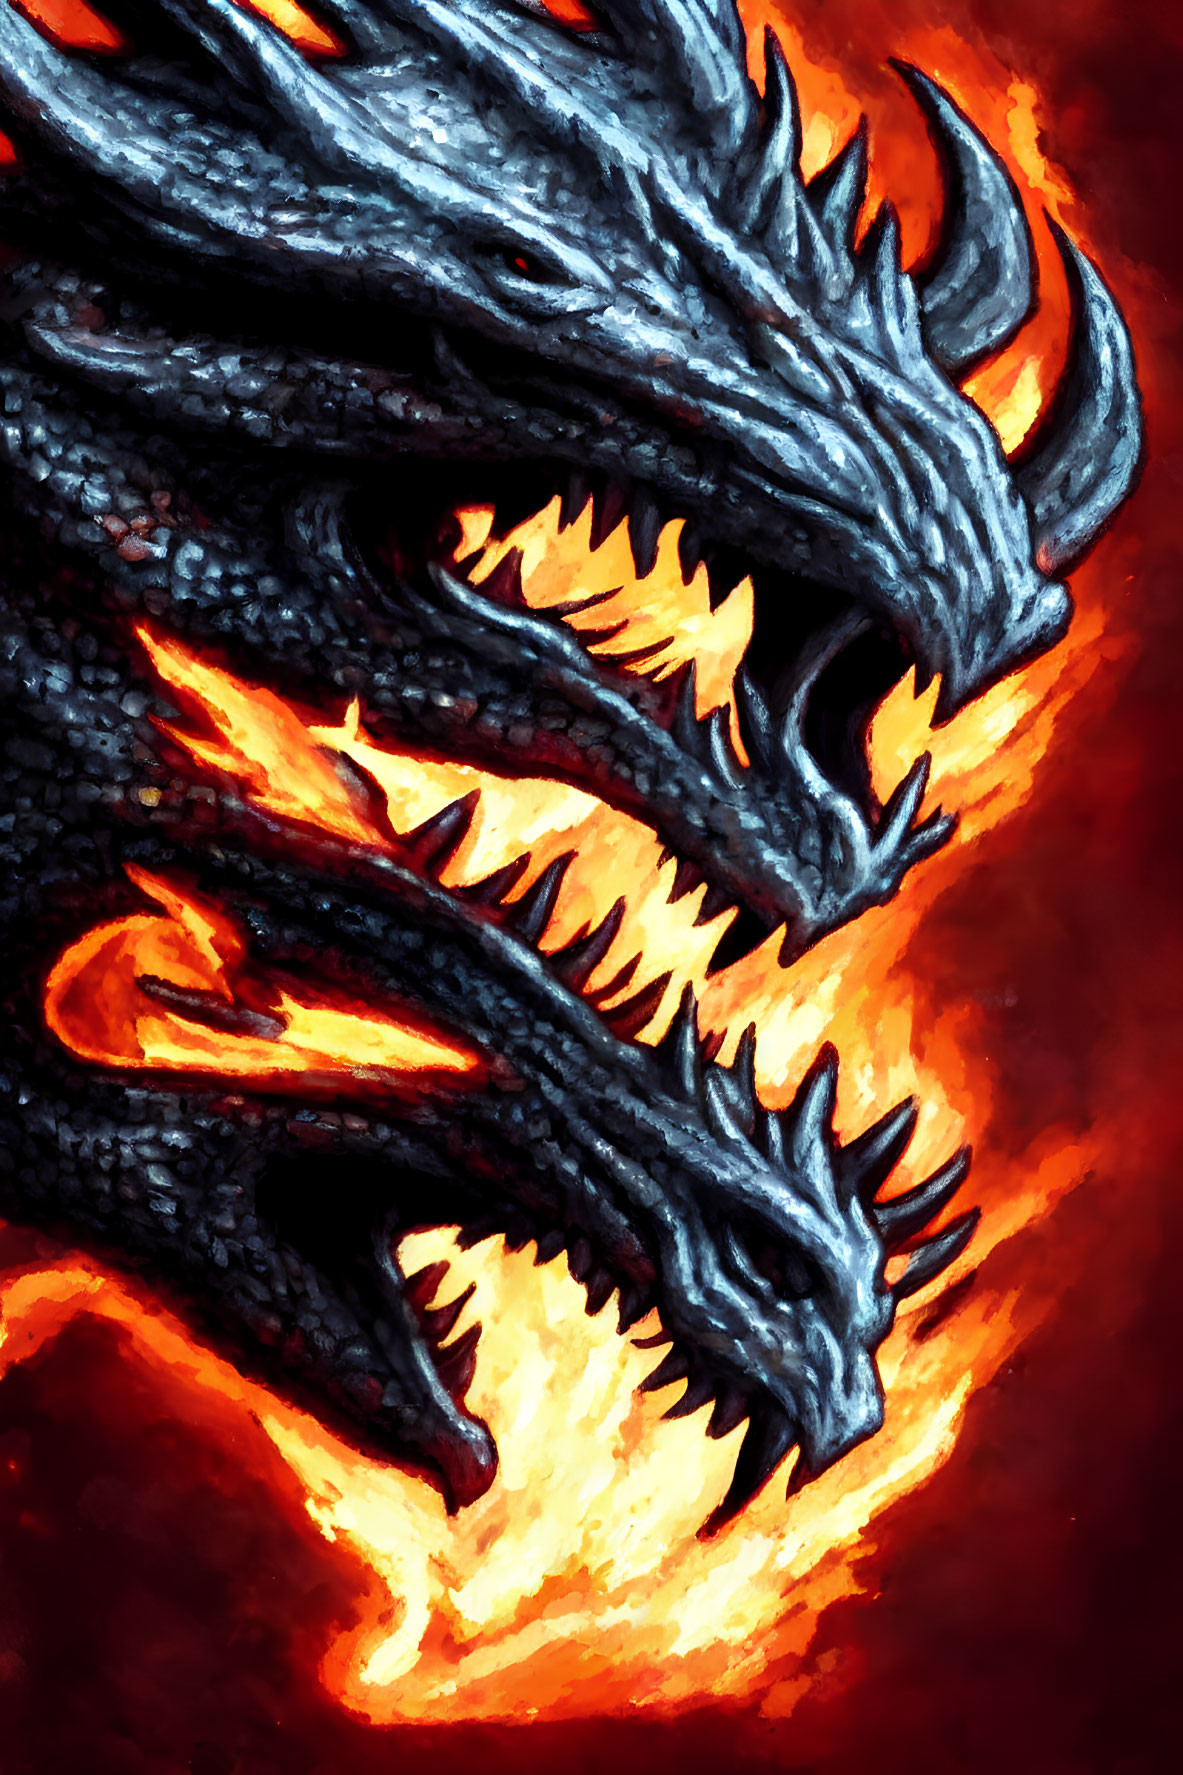 Three fierce black dragons with glowing orange mouths on fiery background